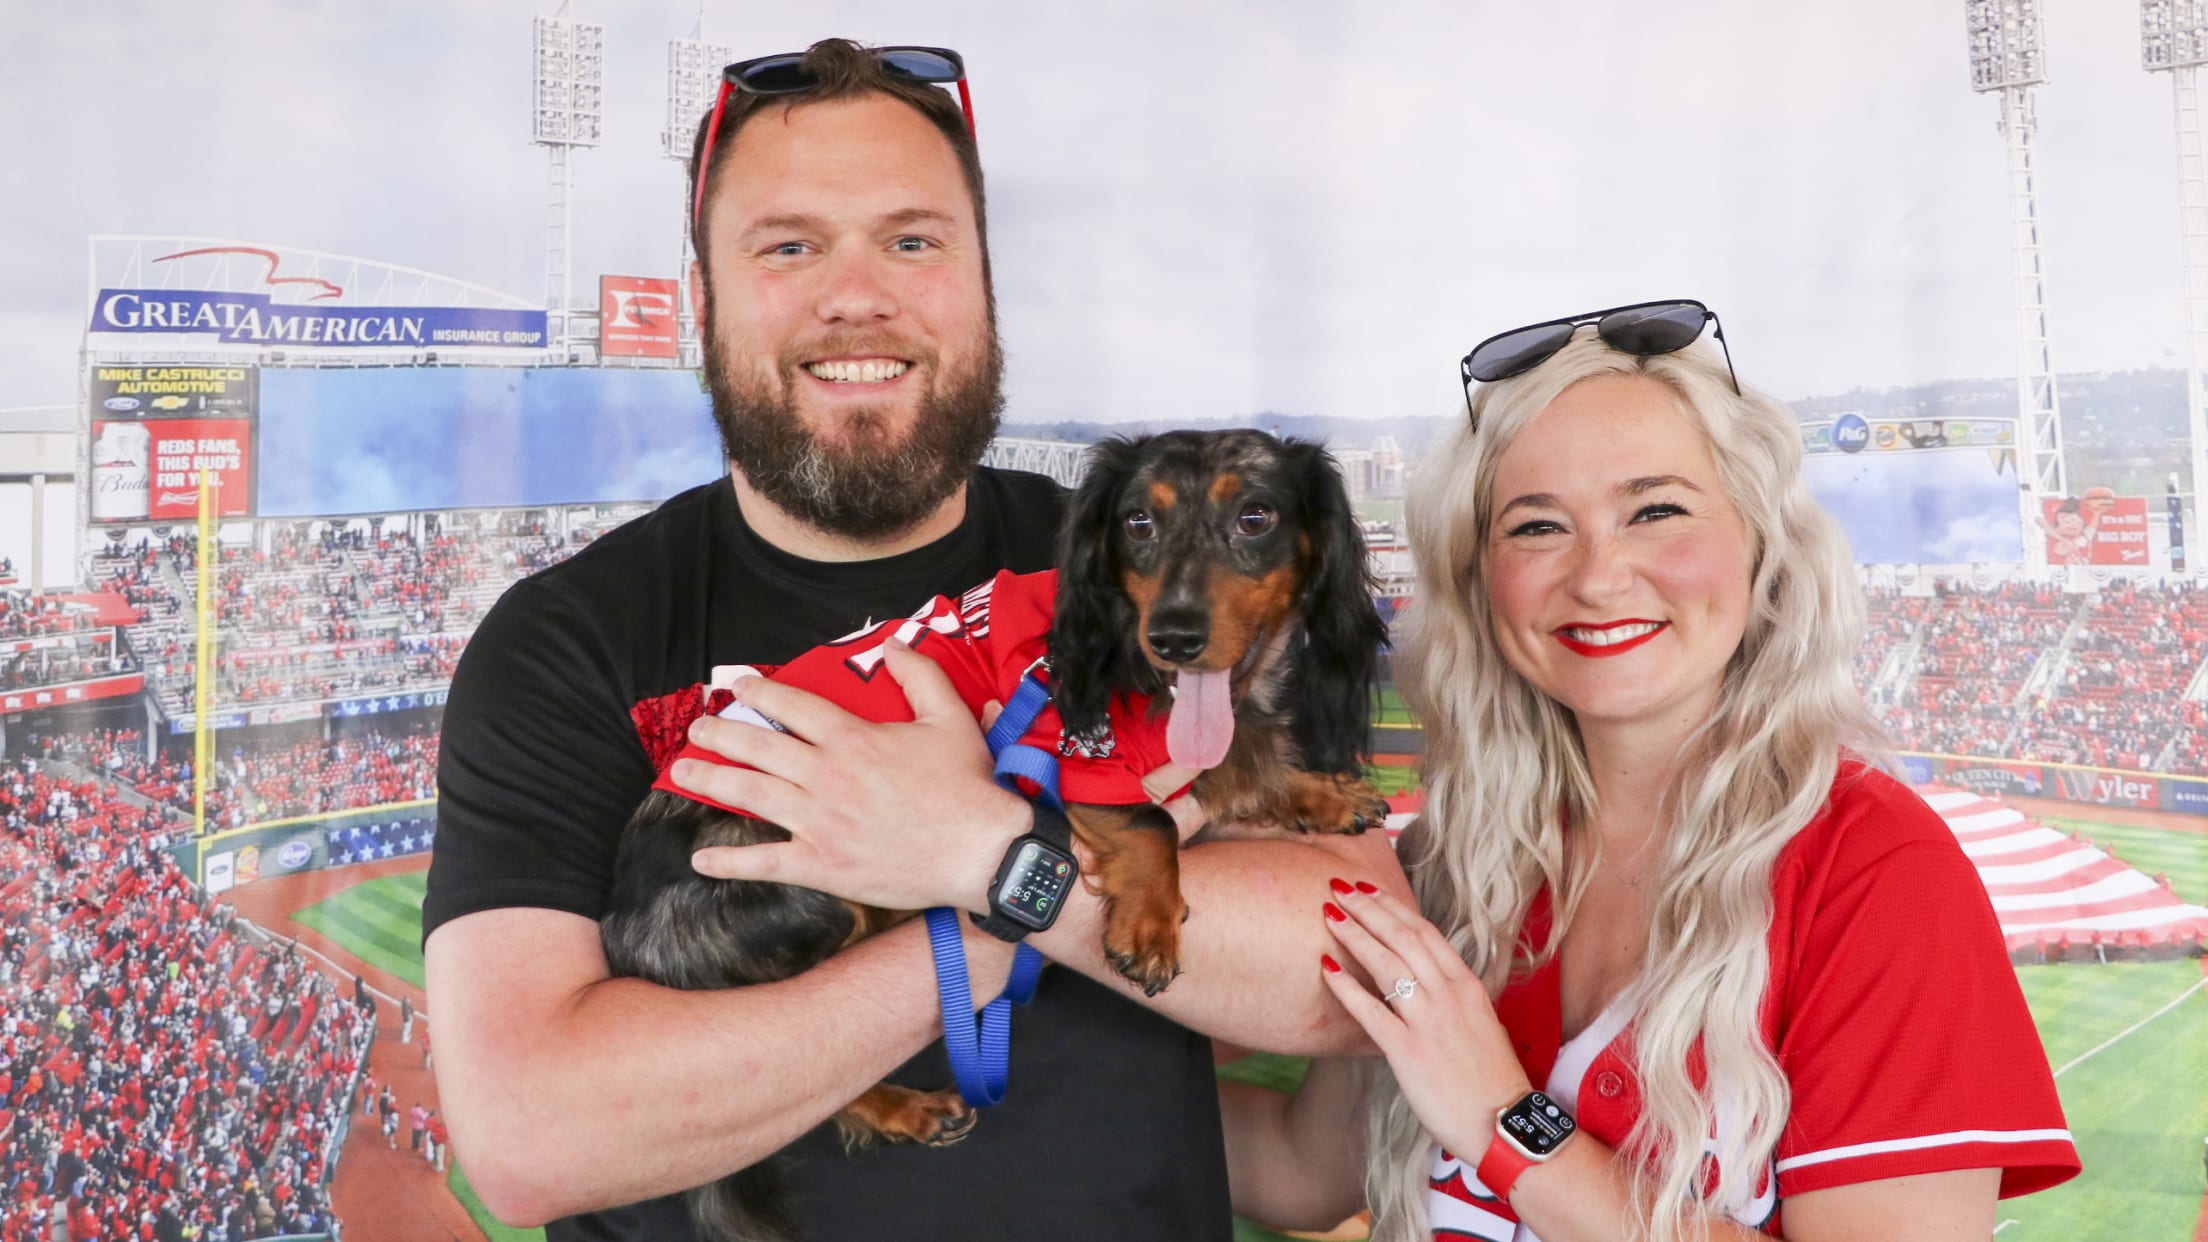 Great American Ball Park to host Bark in the Park on June 8